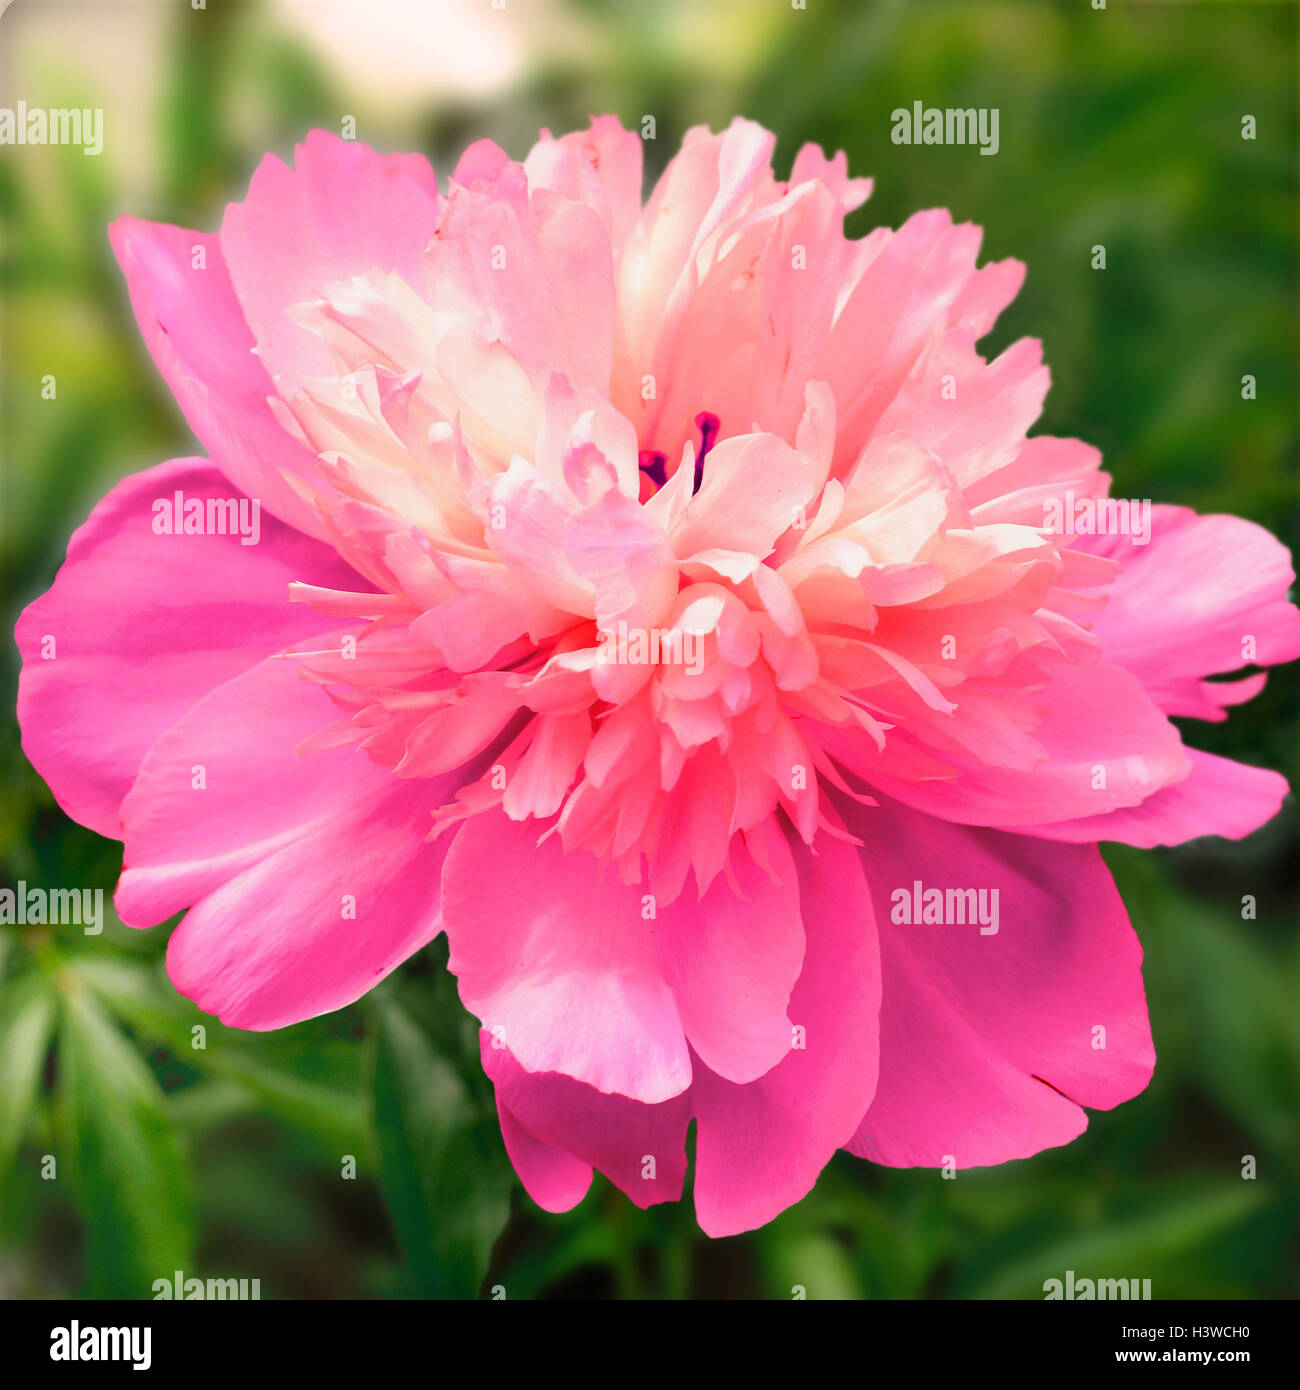 Peony, Paeonia officinalis, detail, blossom, plants, flowers, flower, roses, rose, rose blossoms, pink, pawn peony, pawn rose, gout rose, clap rose, medicinal plants, herbs, medicament plants, nature drugs, nature, beauty Stock Photo